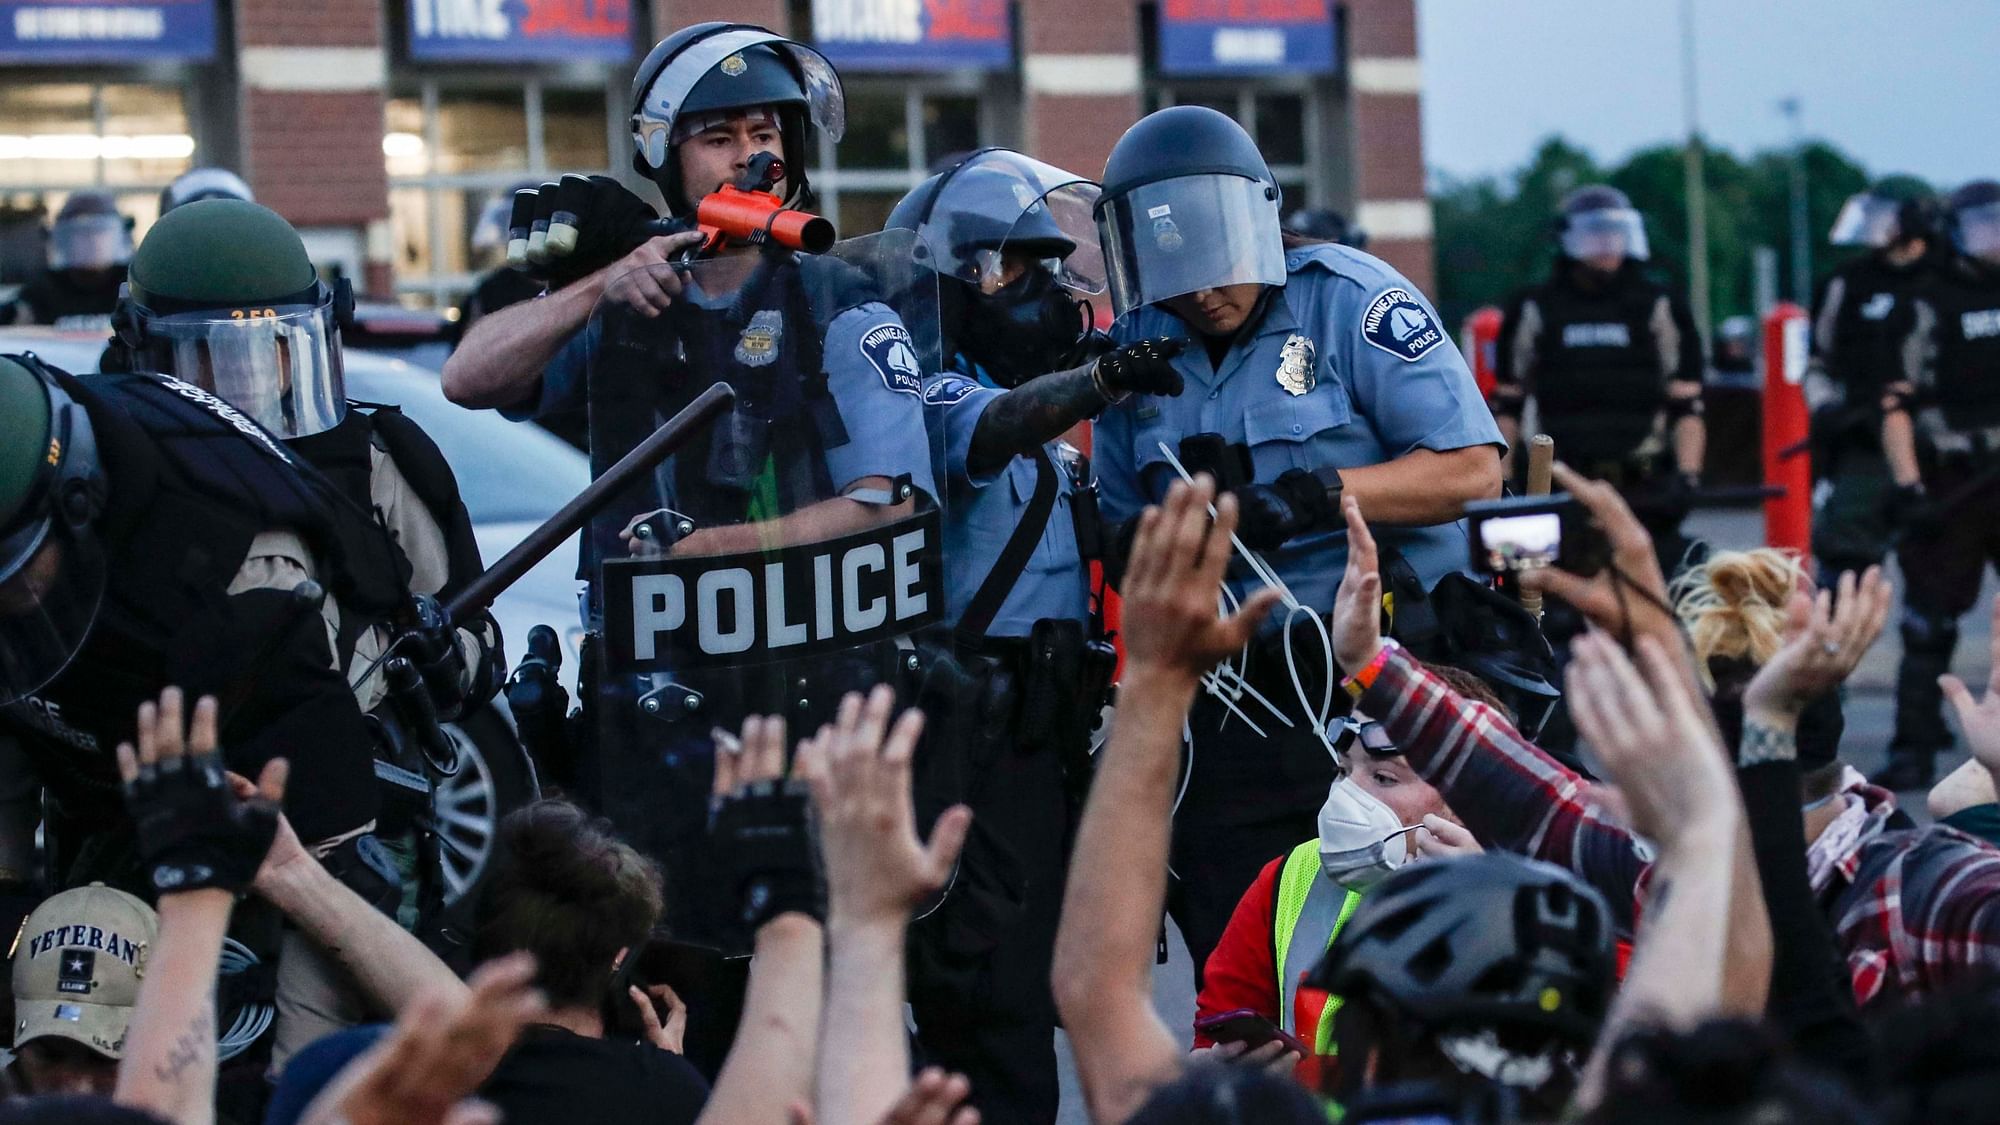 A police officer points a hand cannon at protesters who have been detained pending arrest on South Washington Street, Sunday, 31 May, in Minneapolis. Protests continued following the death of George Floyd, who died after being restrained by Minneapolis police officers on Memorial Day.